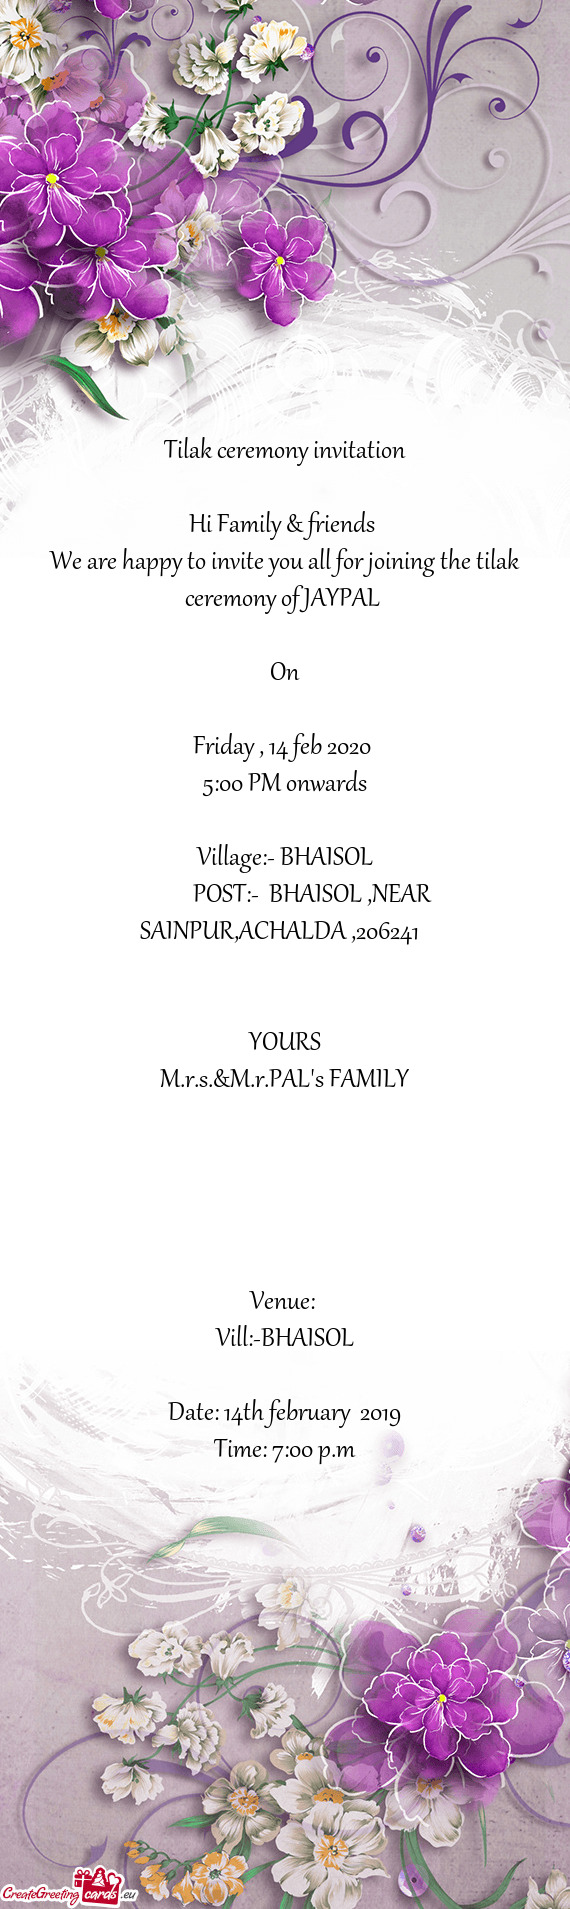 We are happy to invite you all for joining the tilak ceremony of JAYPAL